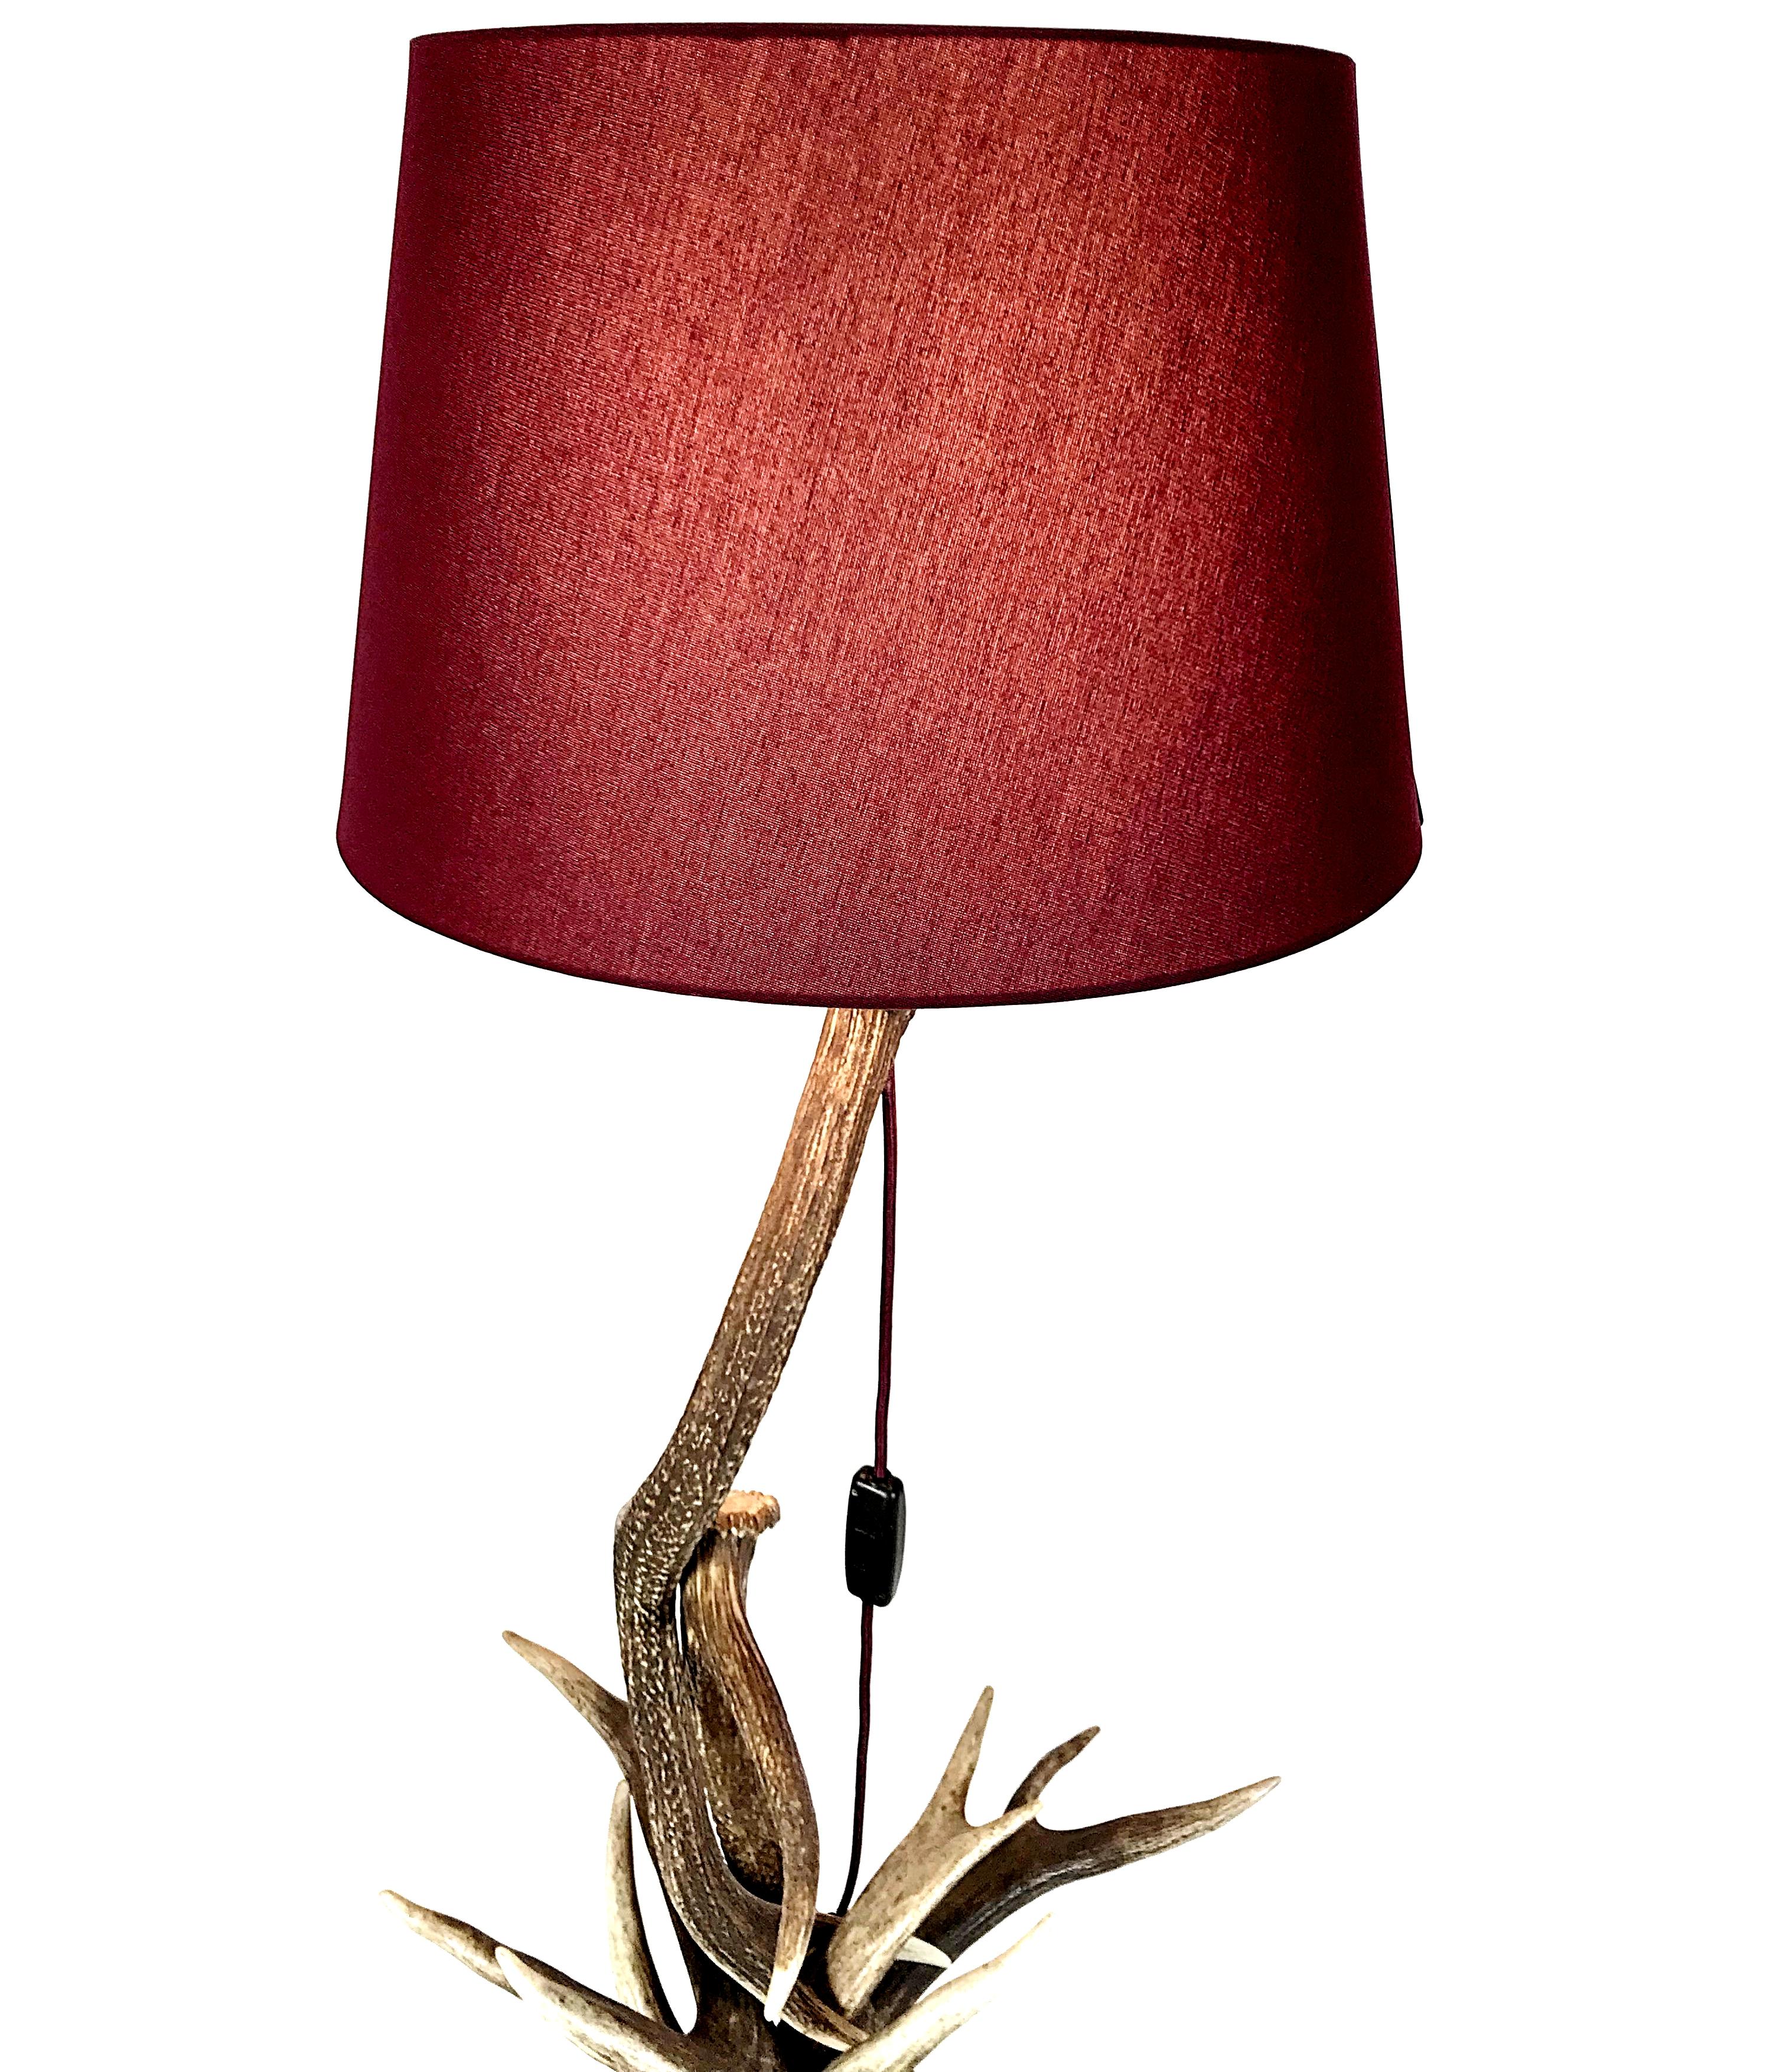 Very impressive deer antler floor lamp handmade in 1940s in Austria. The lamp is made of discarded deer antler. The shade color is Bordeaux like the textile cable with original Bakelite switch. The lamp is in excellent condition. Fully working,